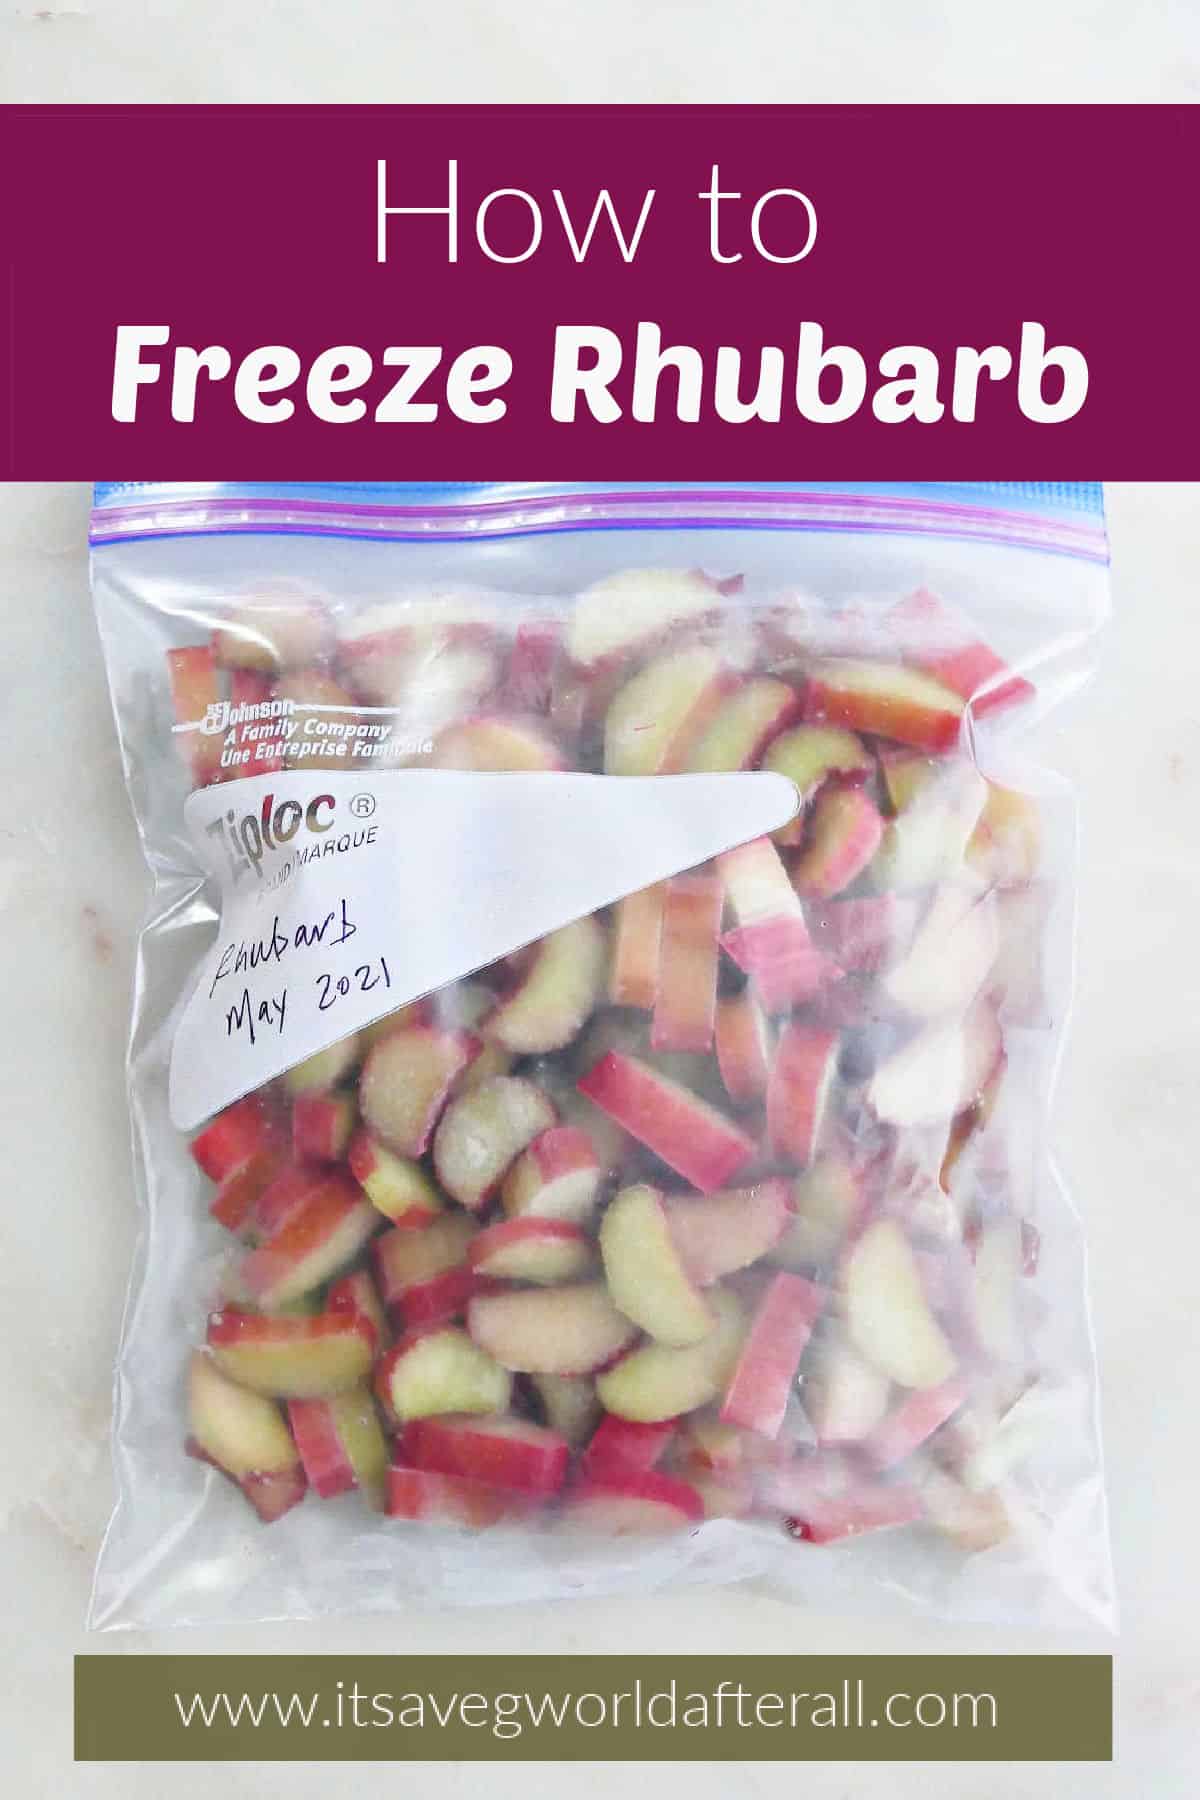 image of frozen rhubarb in a Ziploc bag on a counter under text box